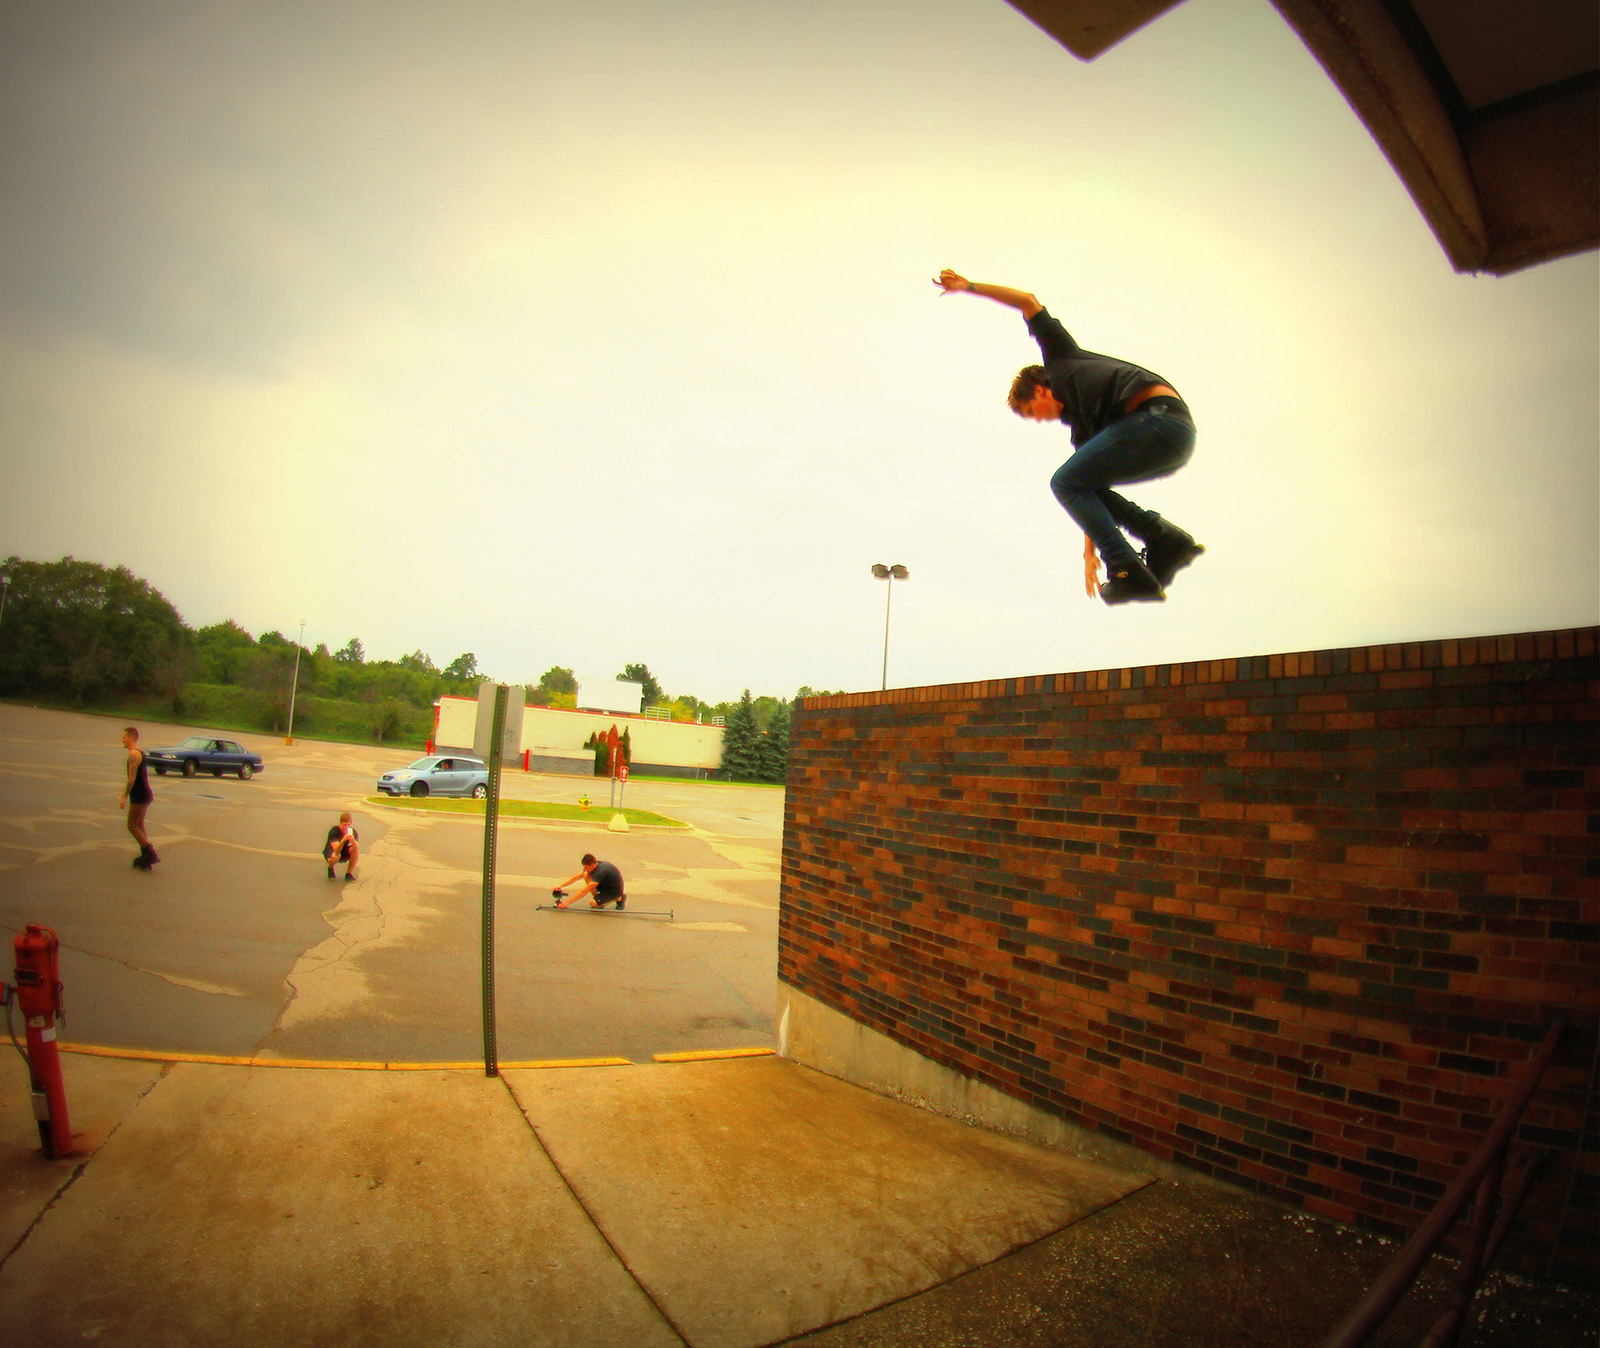 “A Day in the Mitten” Street Comp